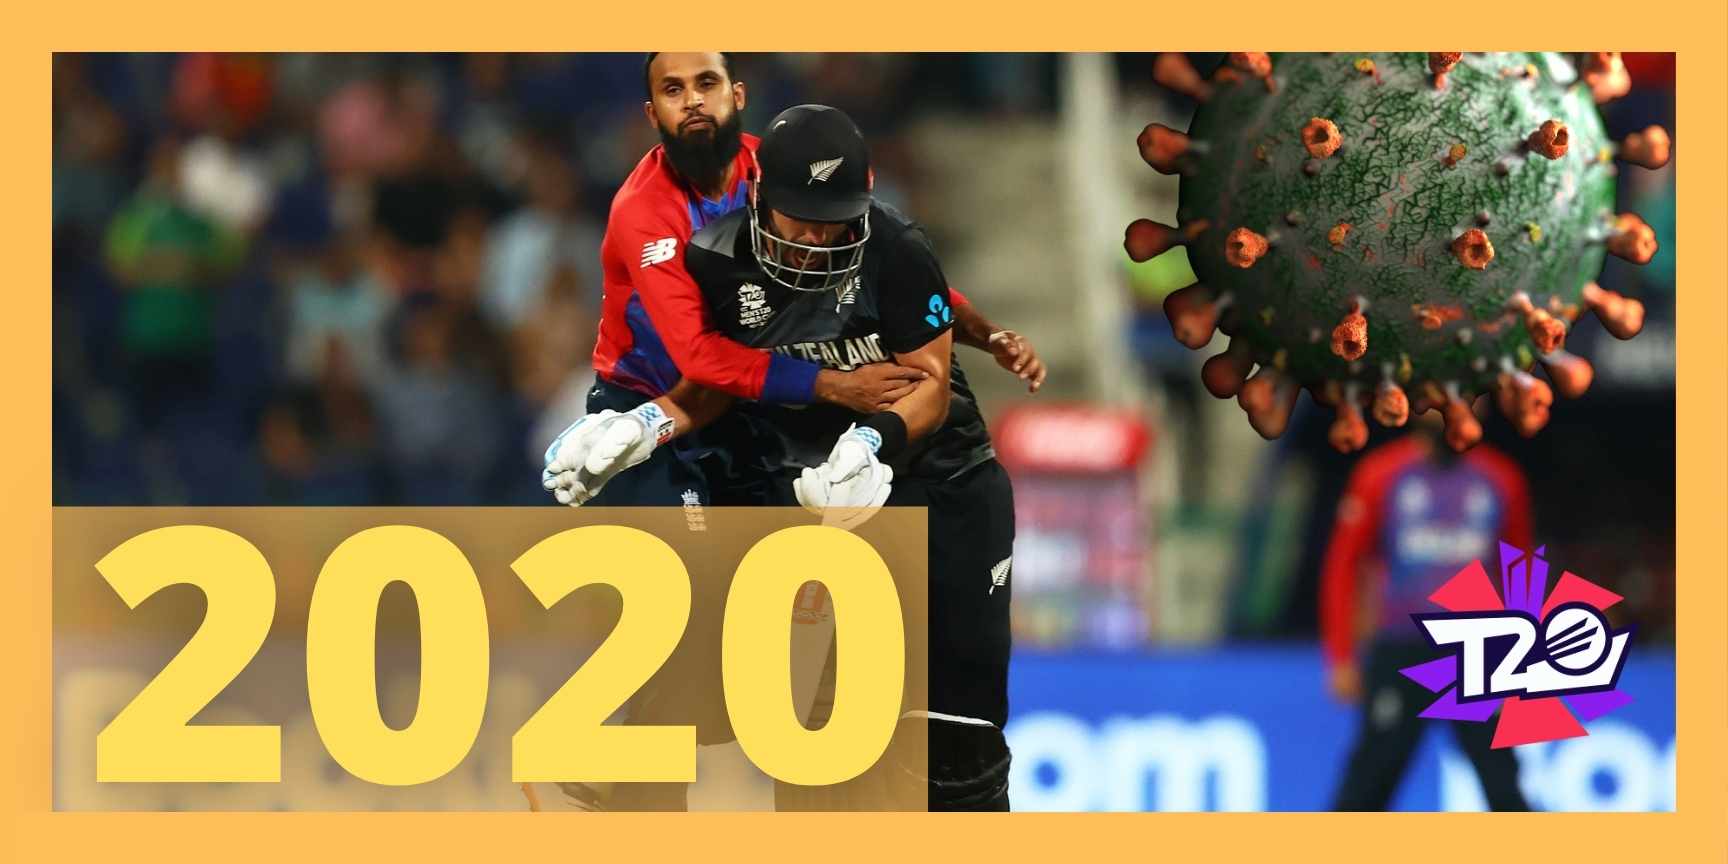 Some words about T20 Cricket World Cup in 2020